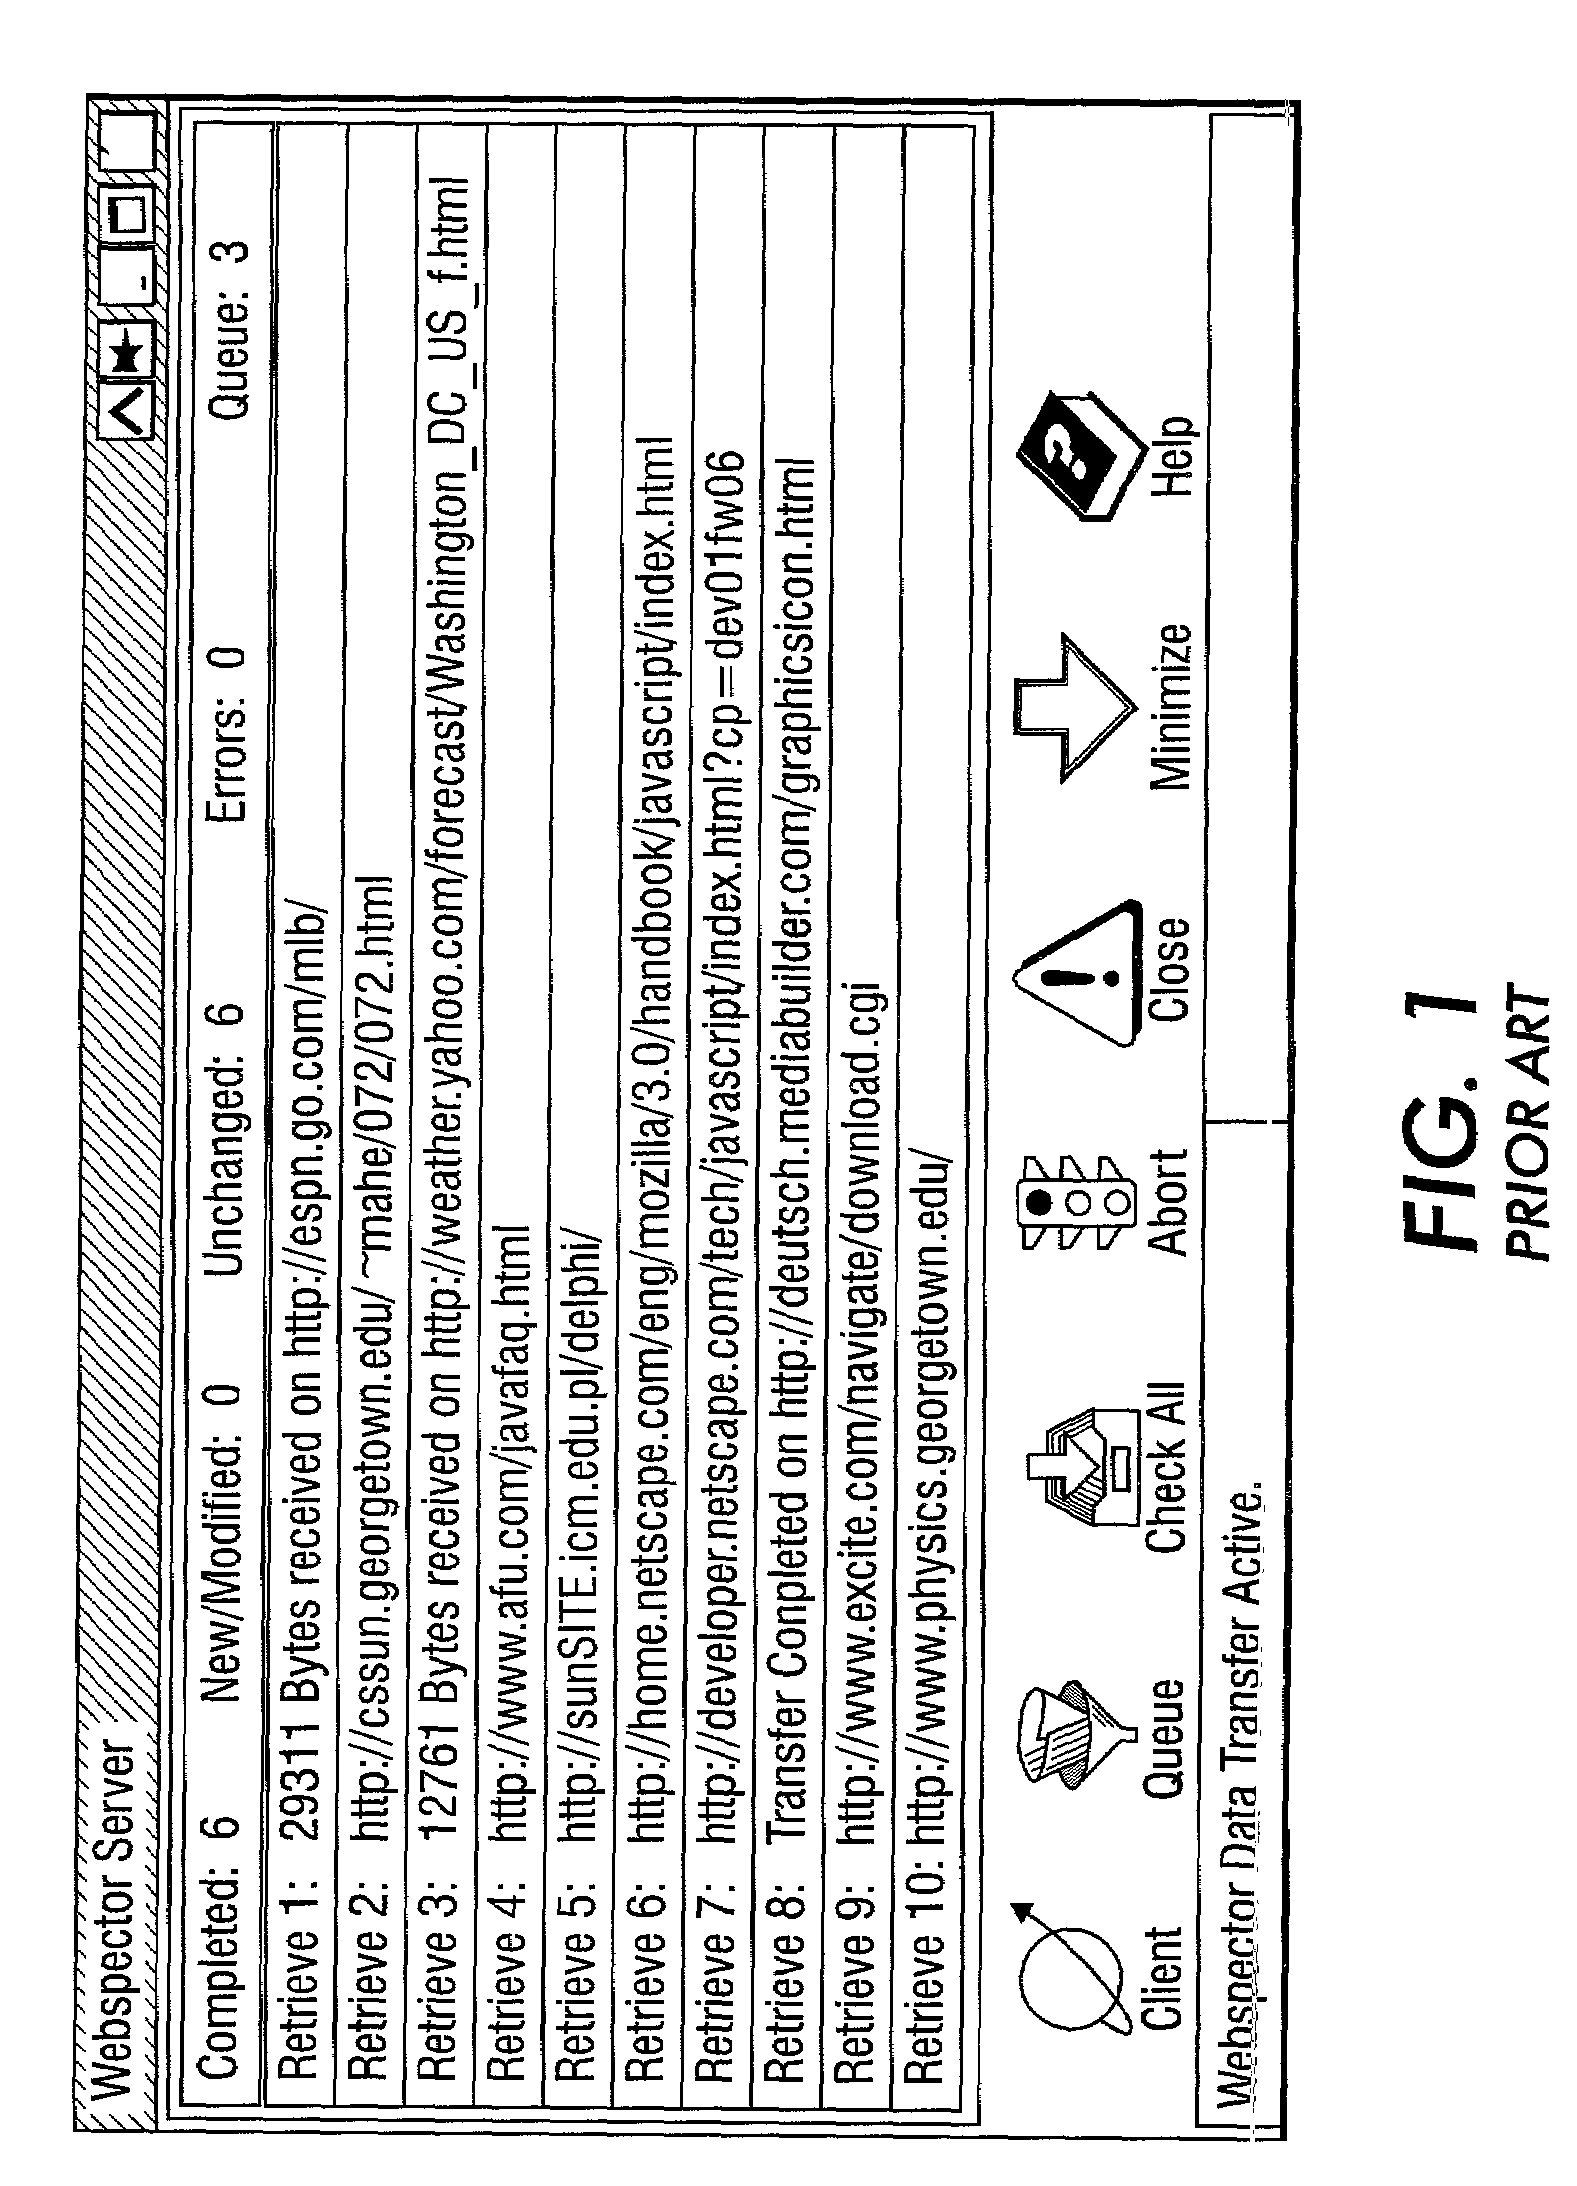 Method and apparatus for collaborative document versioning of networked documents